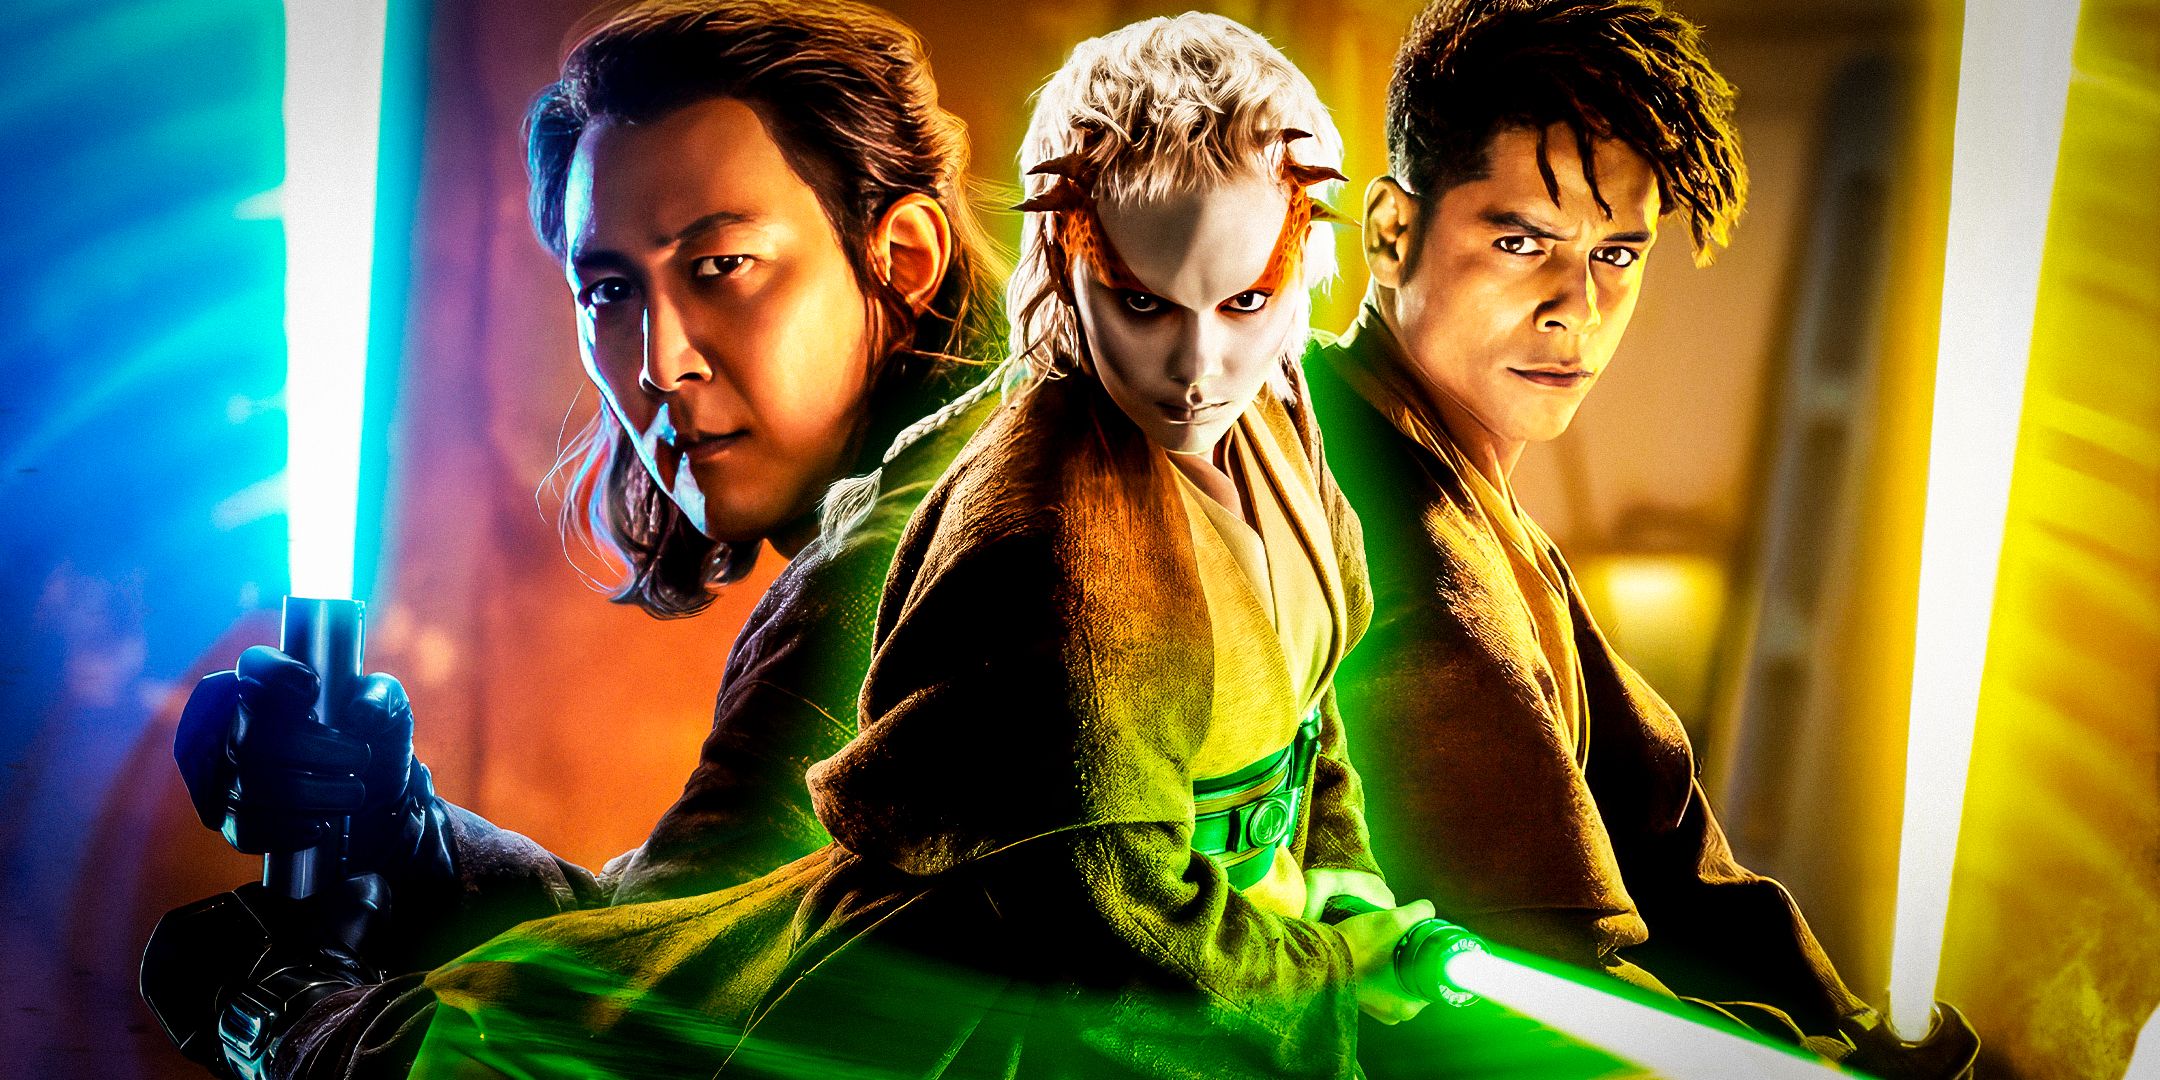 Master Sol, Jecki Lon, and Yord Fandar wielding their lightsabers in character posters for The Acolyte 